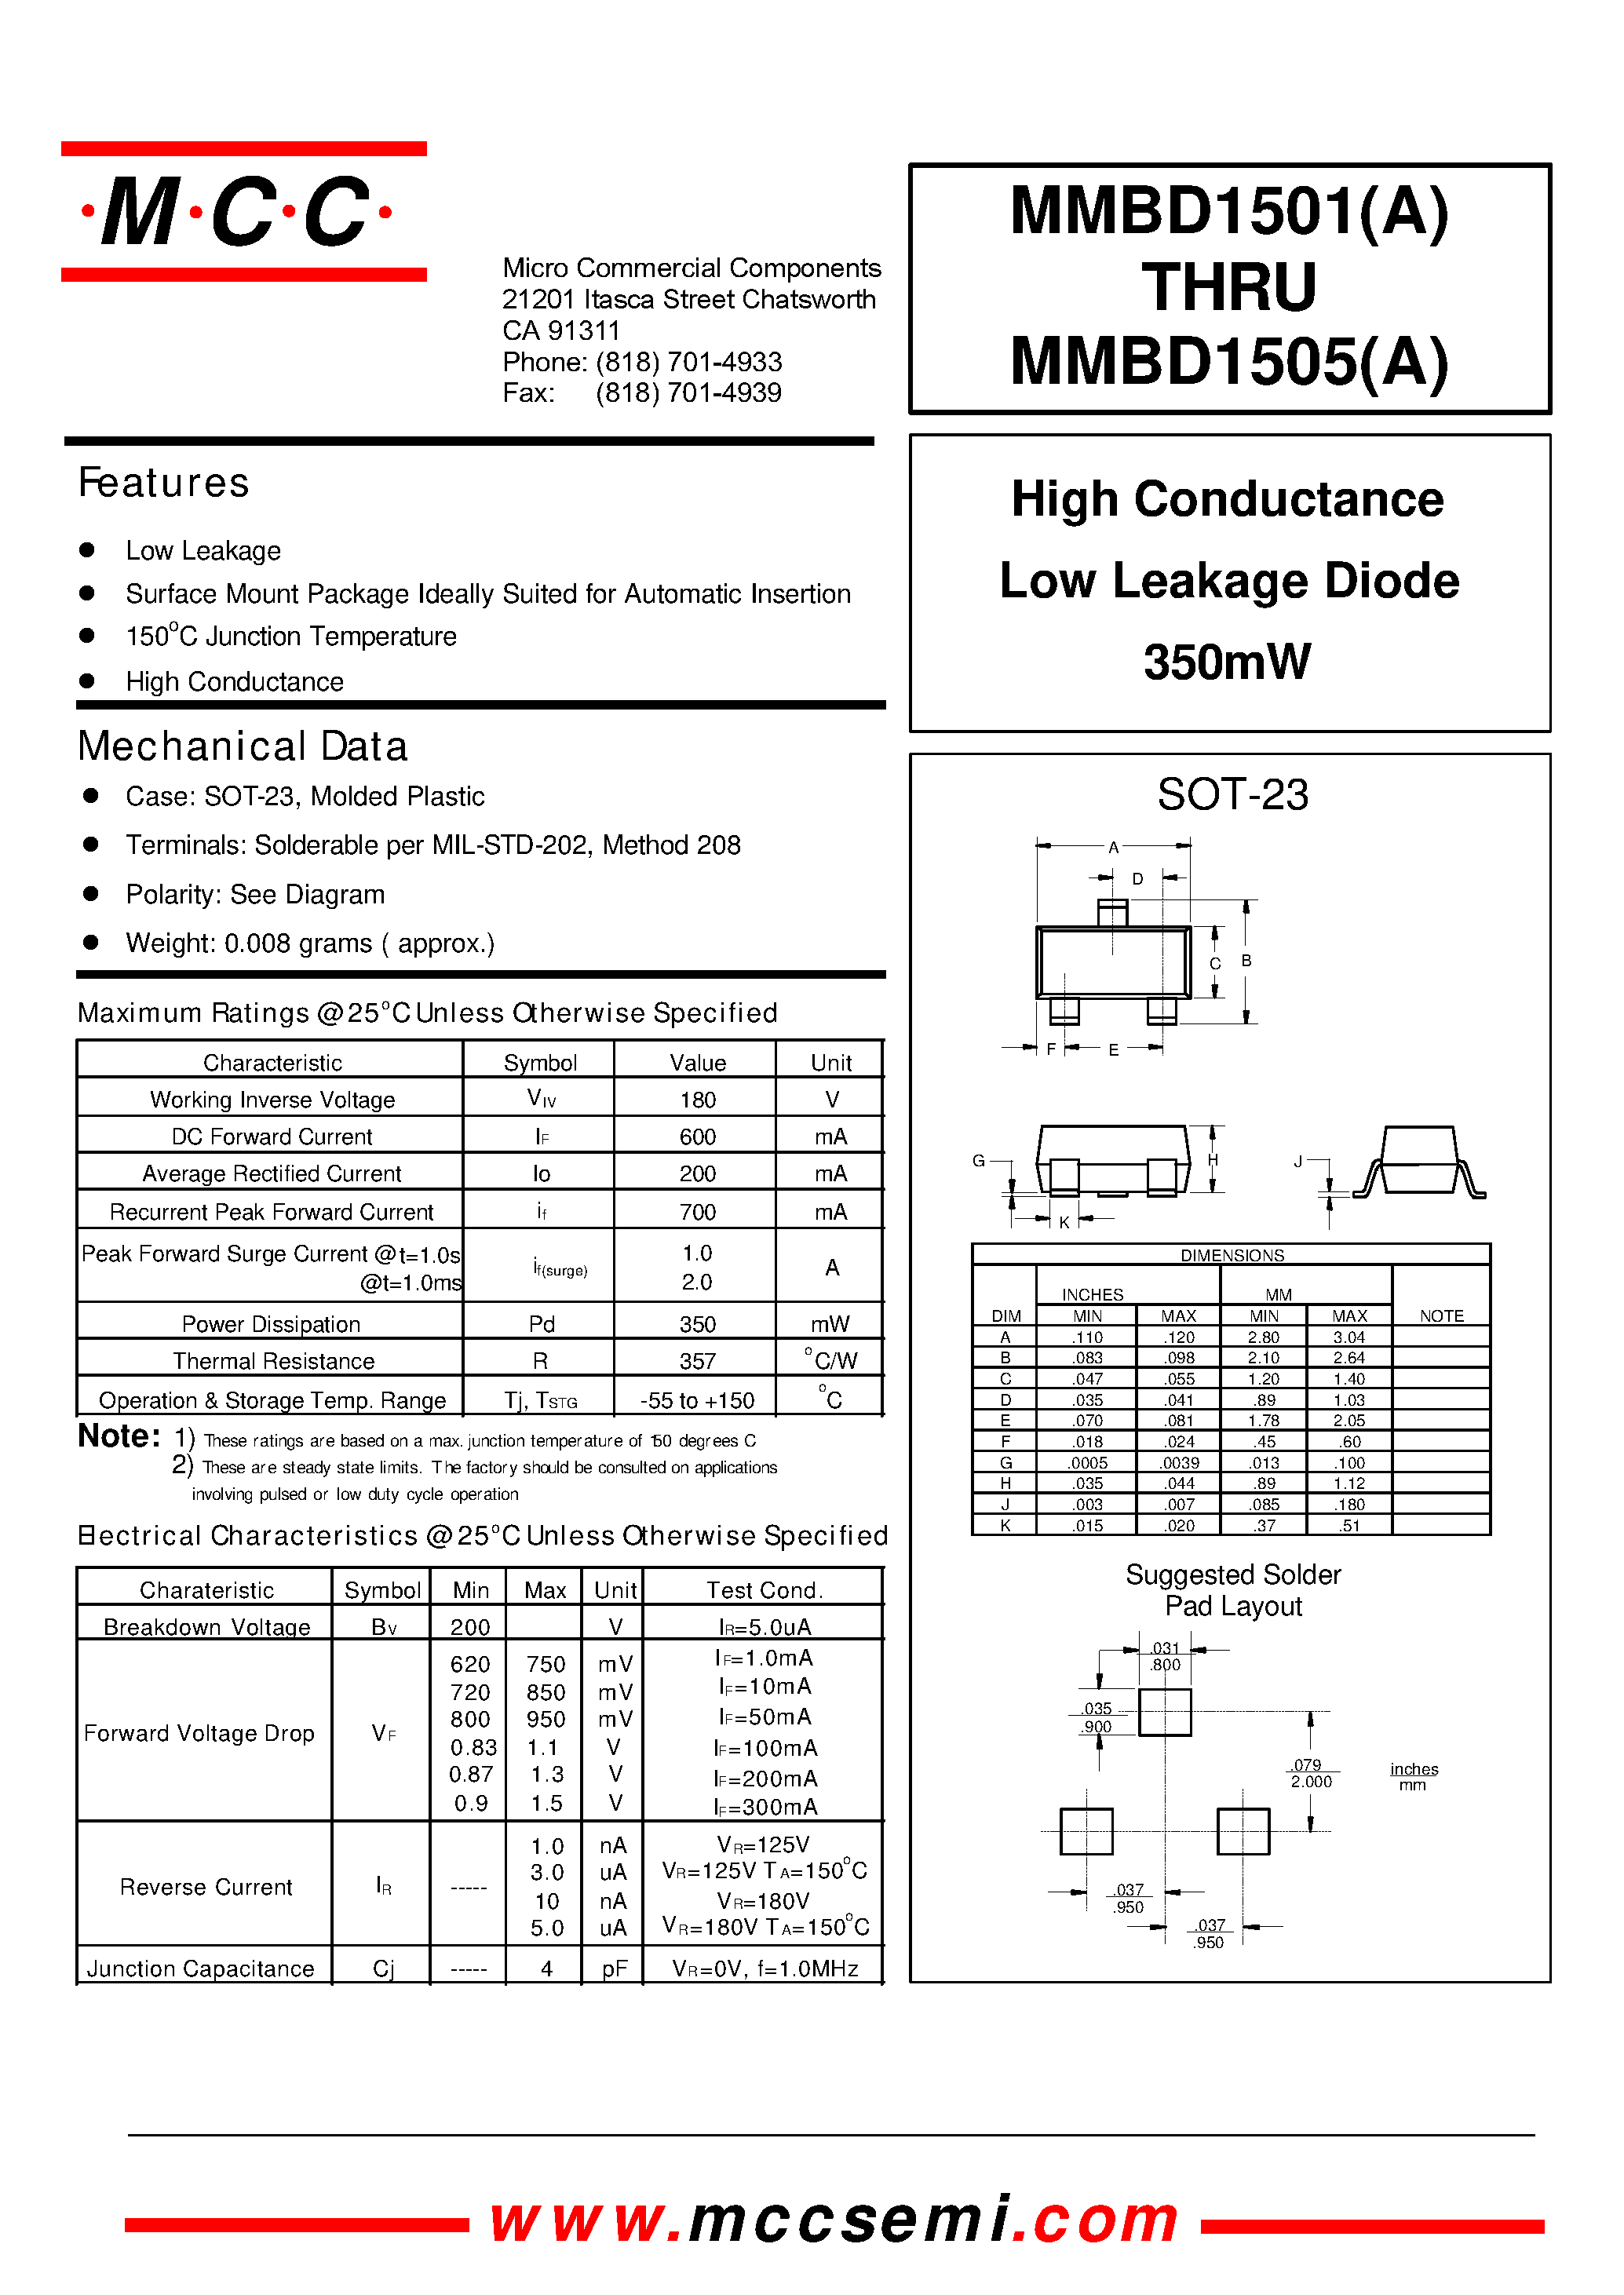 Даташит MMBD1503 - High Conductance Low Leakage Diode 350mW страница 1